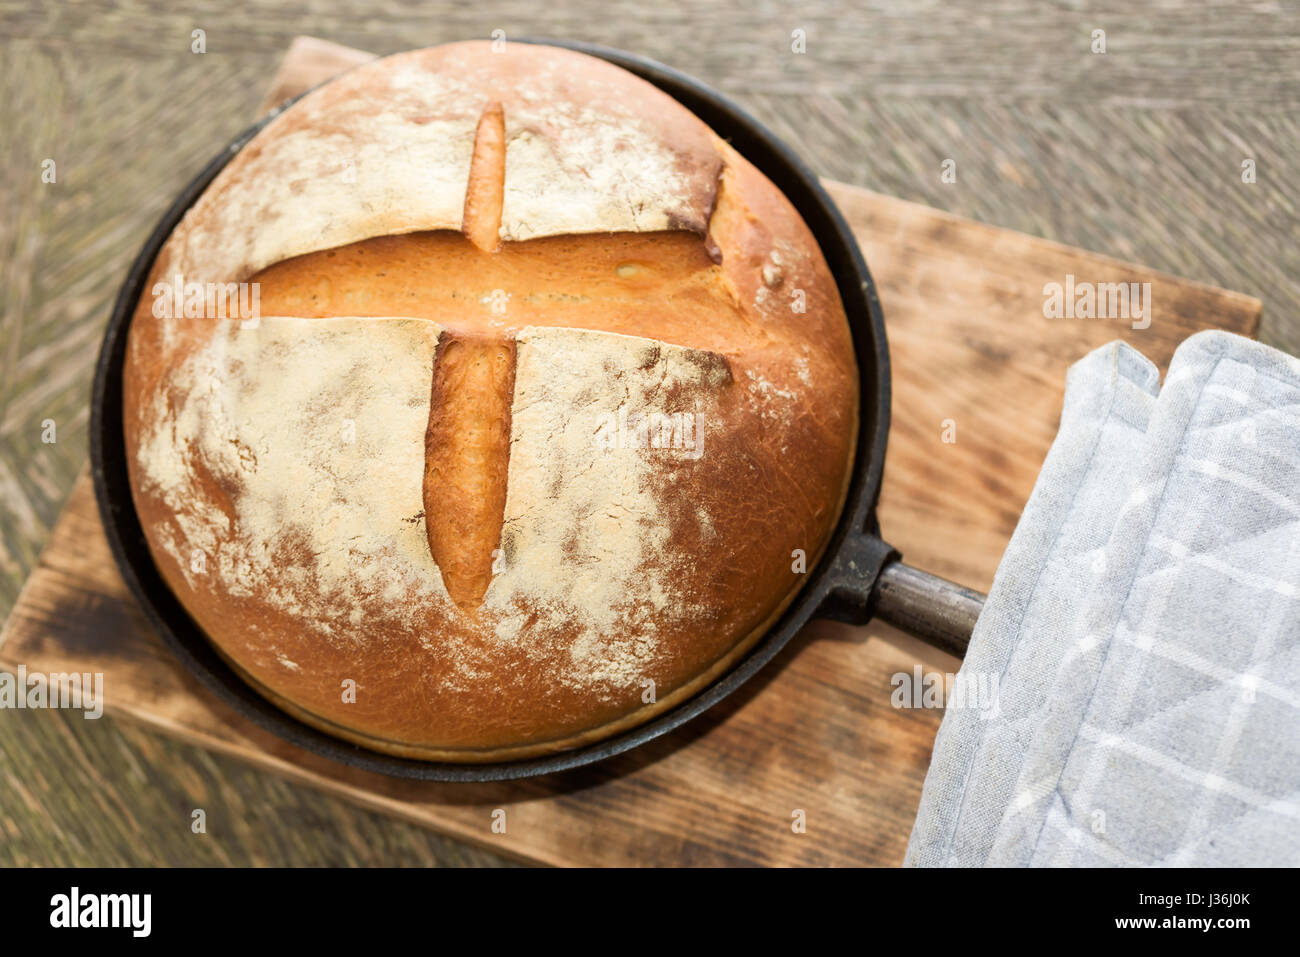 Newly baked artisan bread in cast iron skillet on wooden cutting board. Gray potholder at side. Stock Photo